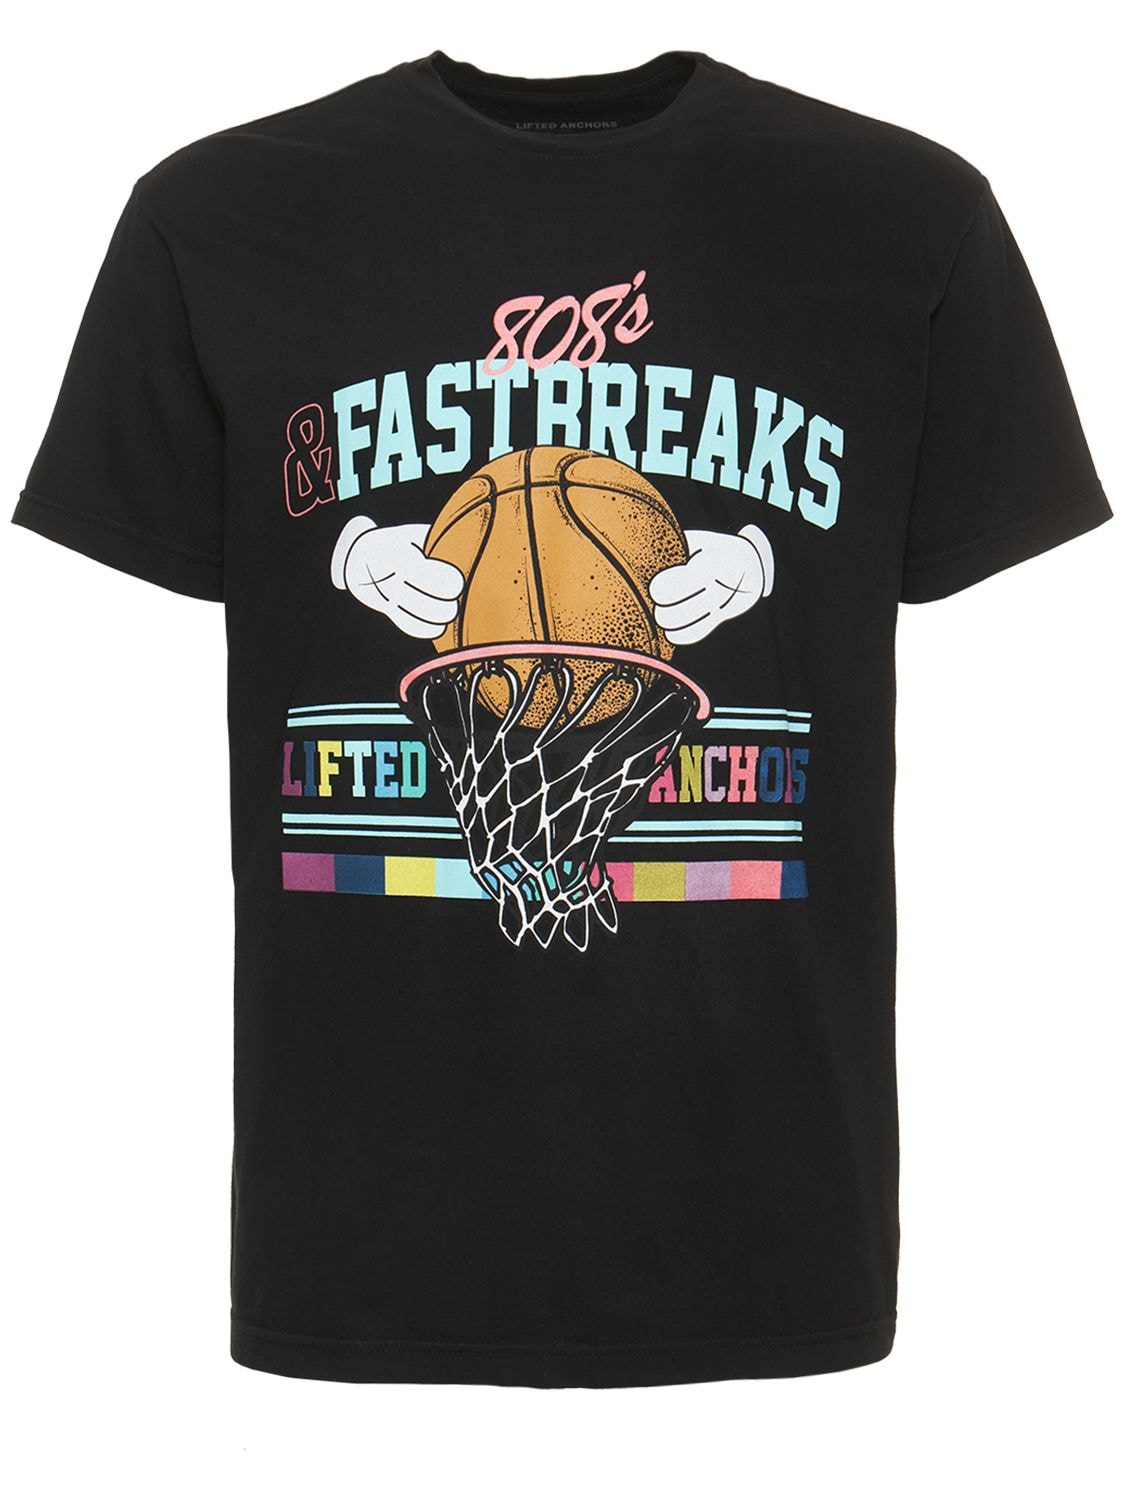 Lifted Anchors Fastbreaks Printed Cotton T-shirt In Black